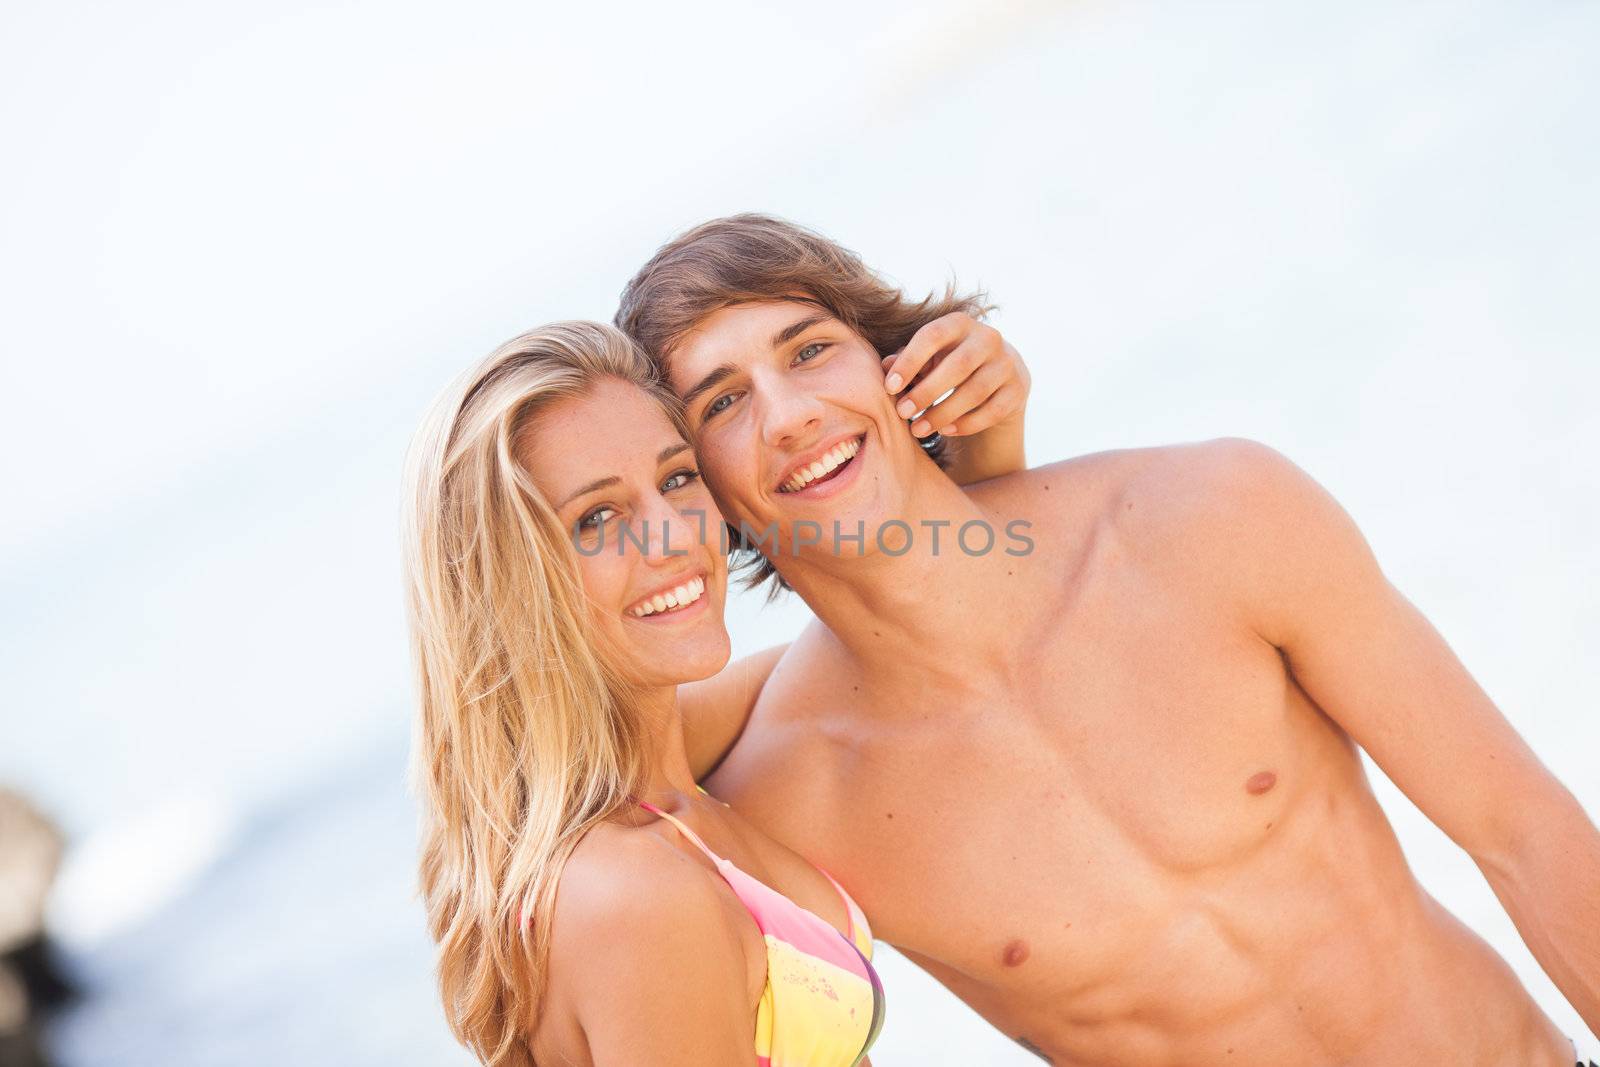 Young couple enjoying themselves at the beach by Lcrespi